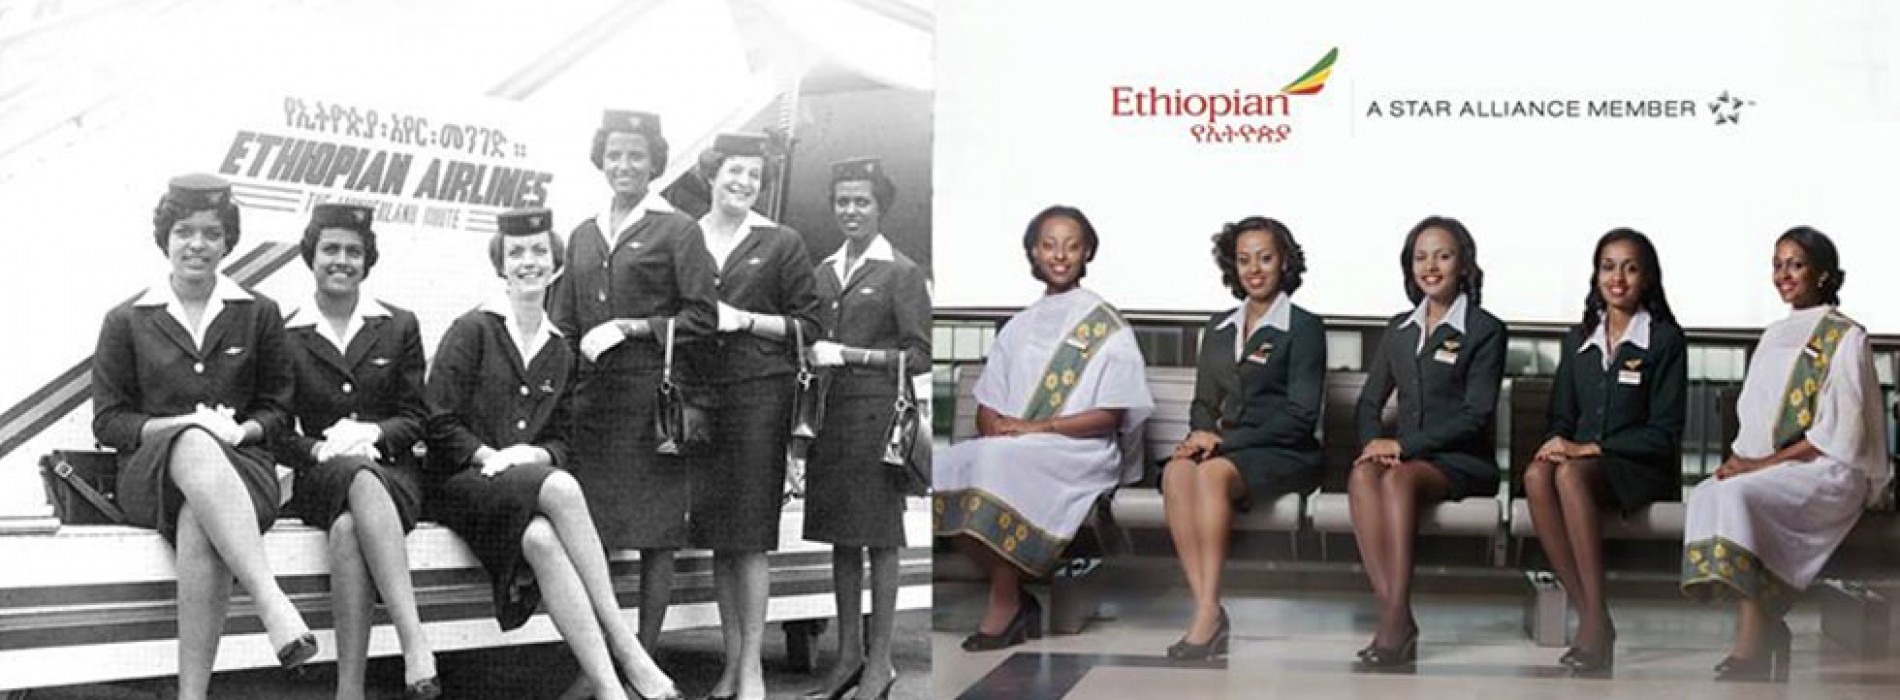 Ethiopian Airlines celebrates its 70 years in air transport services